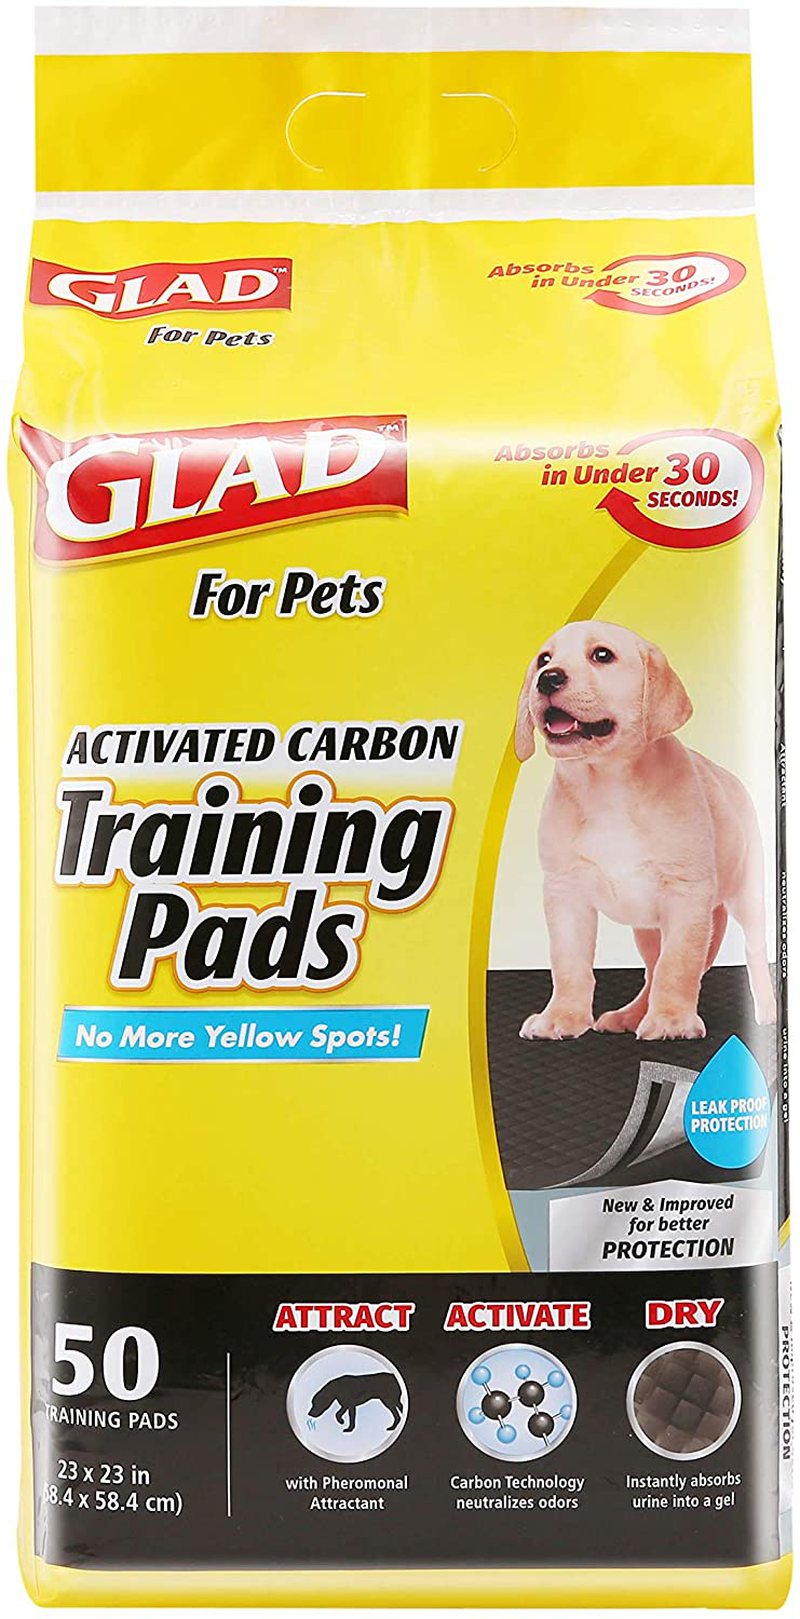 Glad for Pets Black Charcoal Puppy Pads-New & Improved Puppy Potty Training Pads That ABSORB & NEUTRALIZE Urine Instantly-Training Pads for Dogs, Dog Pee Pads, Pee Pads for Dogs, Dog Crate Pads Animals & Pet Supplies > Pet Supplies > Dog Supplies > Dog Diaper Pads & Liners Fetch for Pets Regular 50 Count (Pack of 1) 